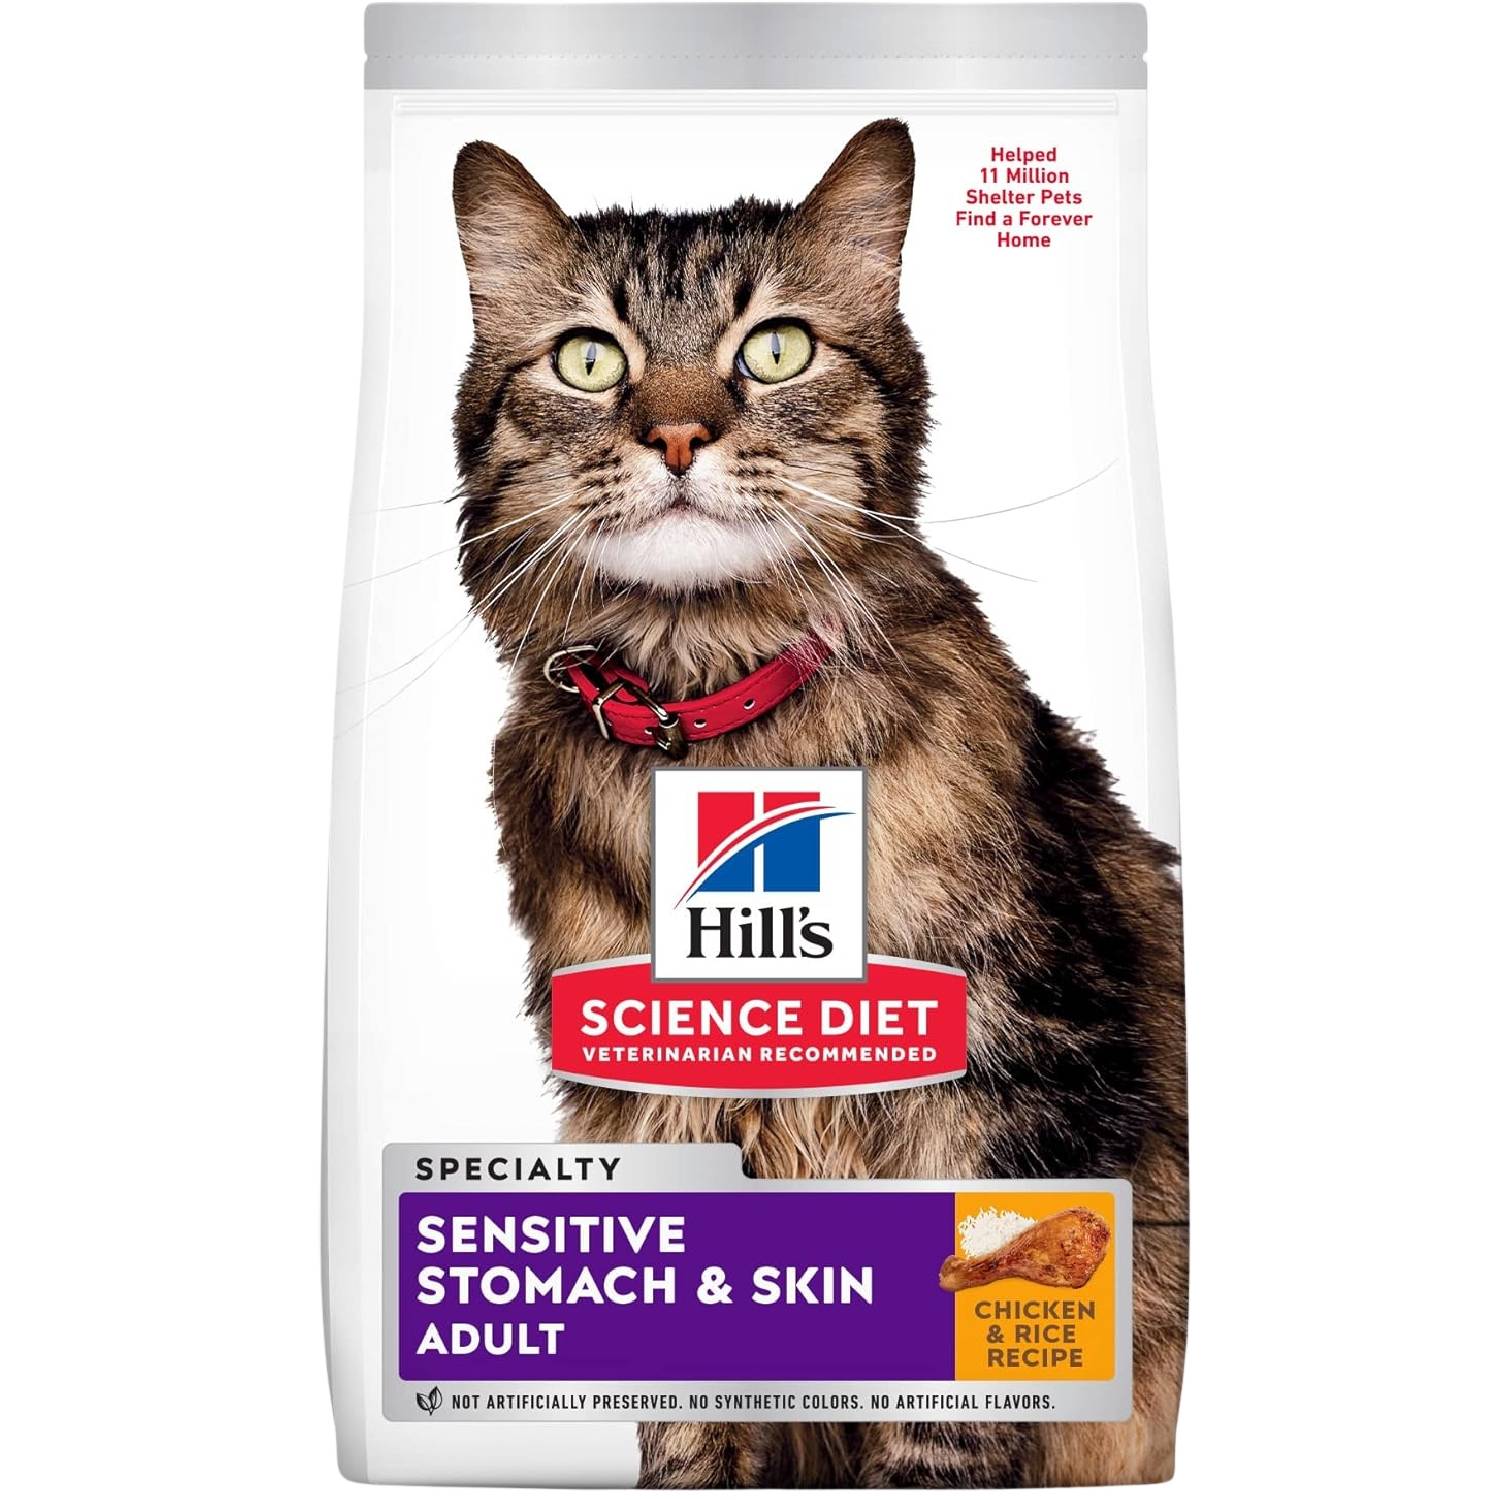 Hill's Science Diet Dry Cat Food, Adult, Sensitive Stomach & Skin, Chicken & Rice Recipe